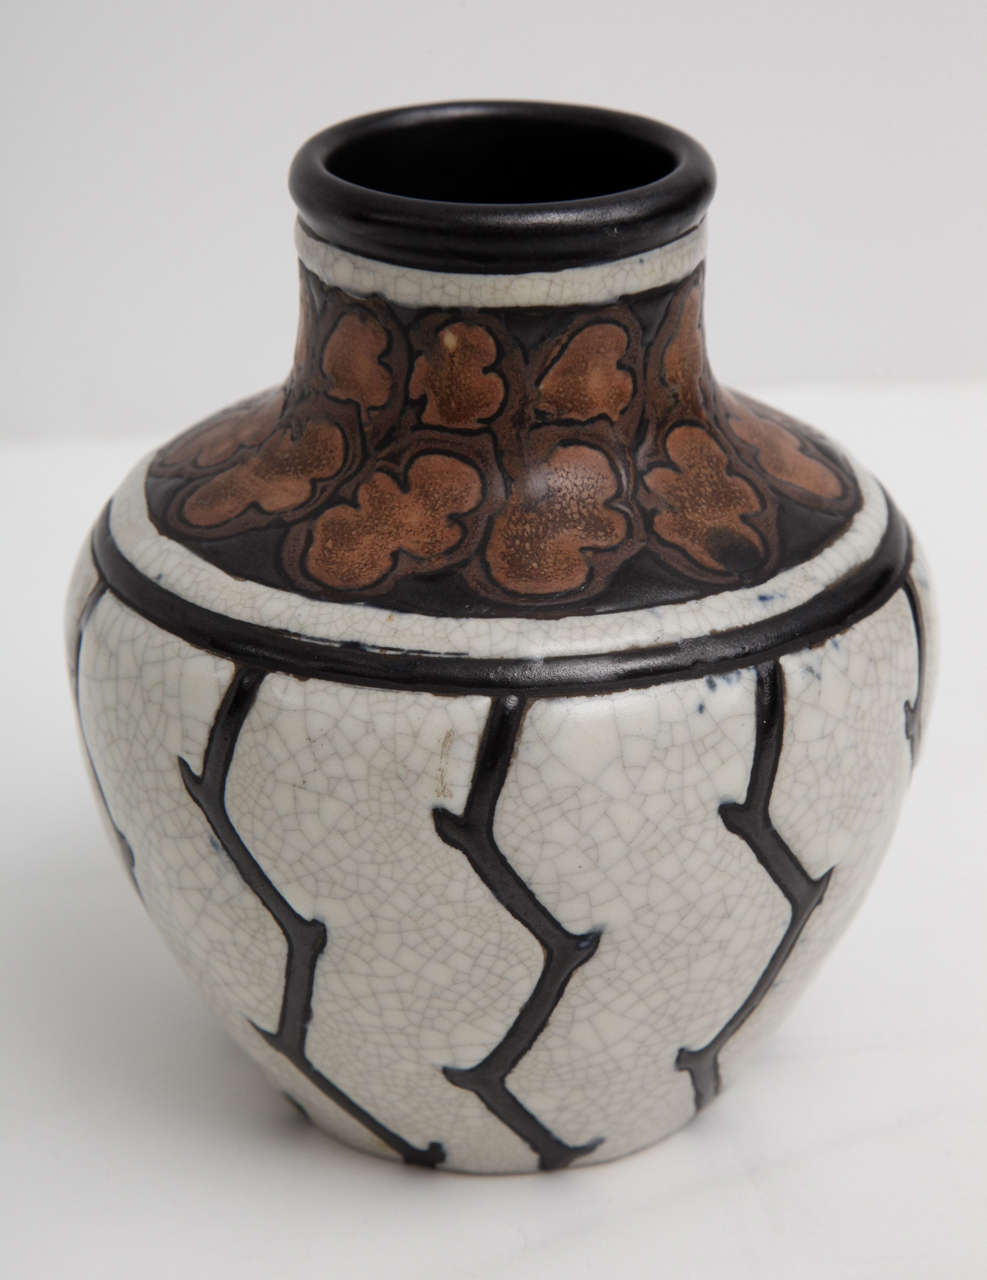 Glazed stoneware vase by Charles Catteau (1881-1966)

Marked Gres Keramis, 903 C
Stamped Boch Frères
Signed Ch. Catteau, D. 776.-